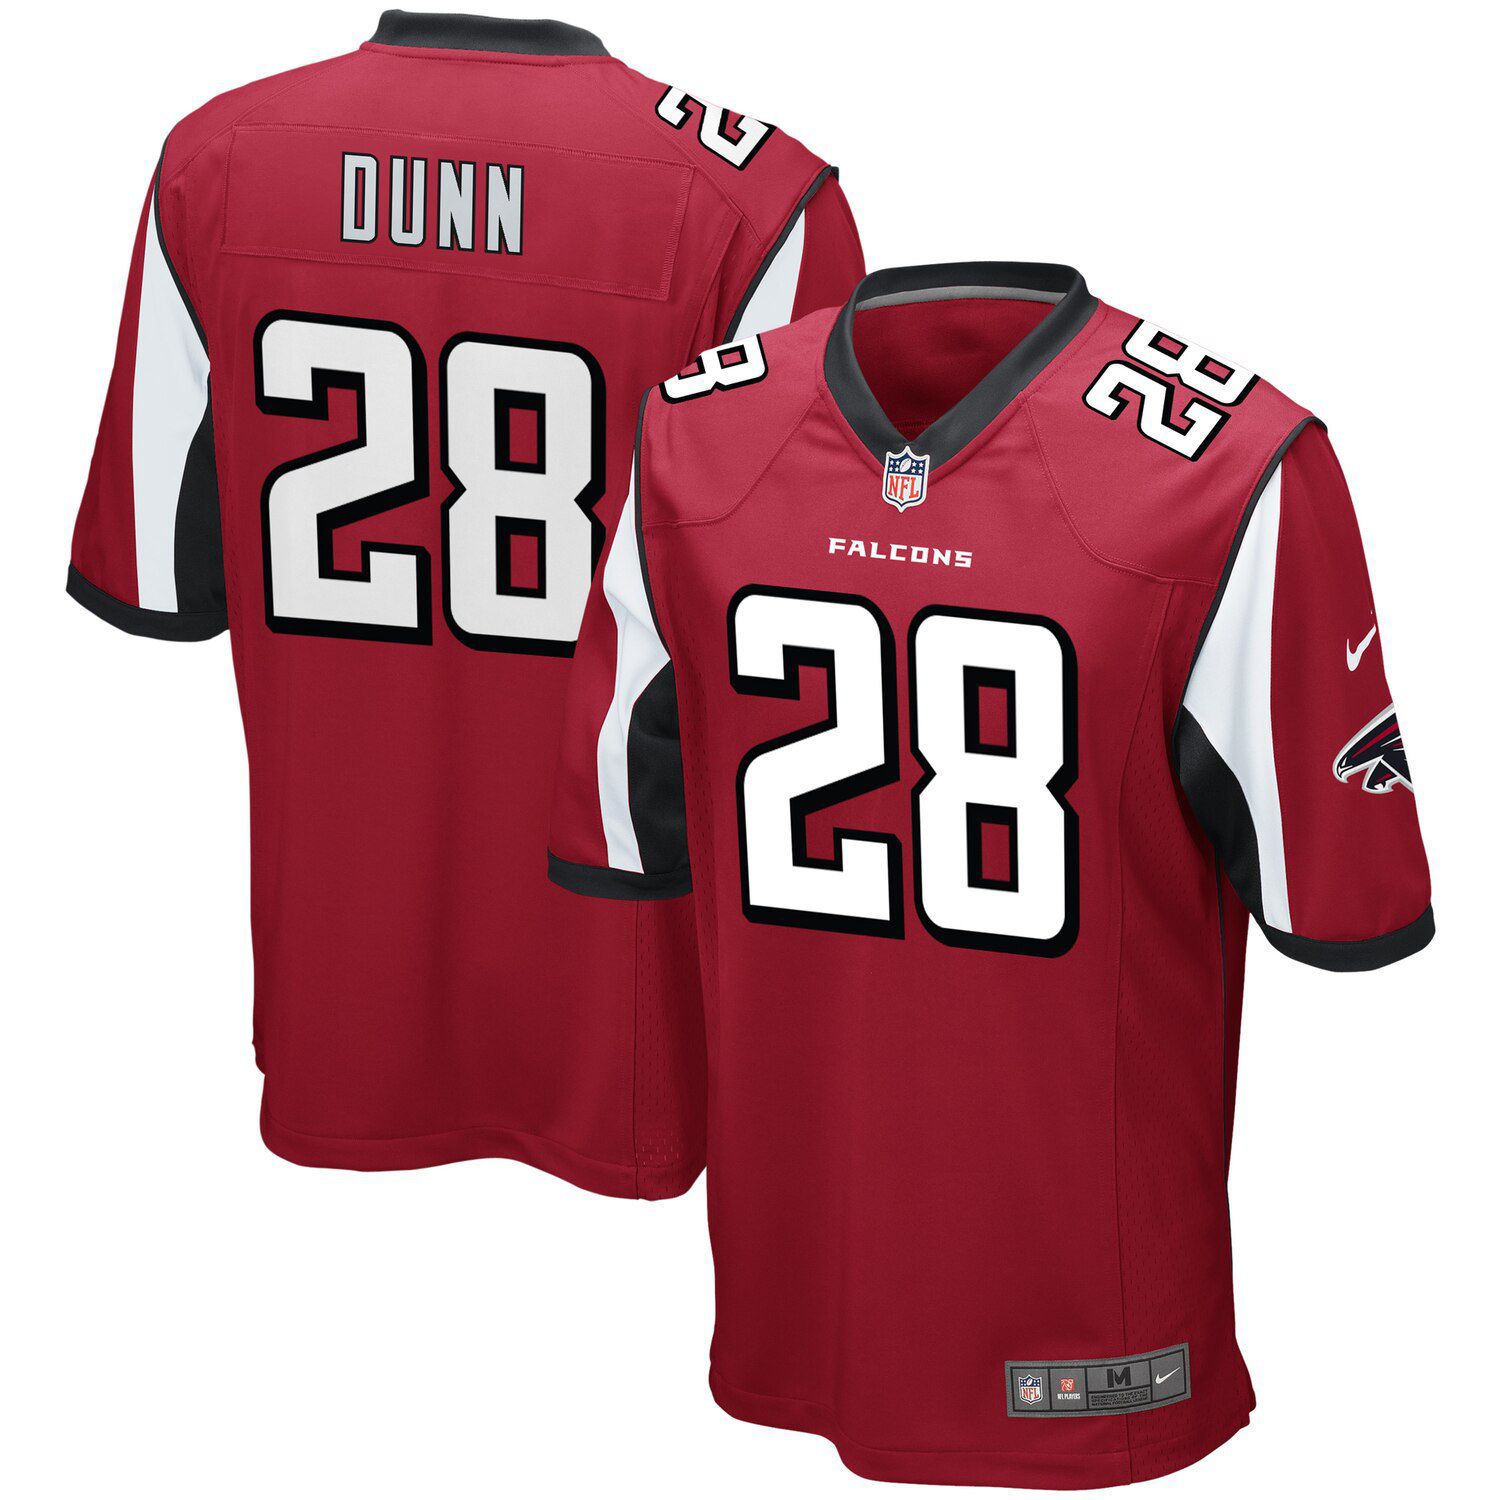 Atlanta Falcons Retired Player Game Jersey